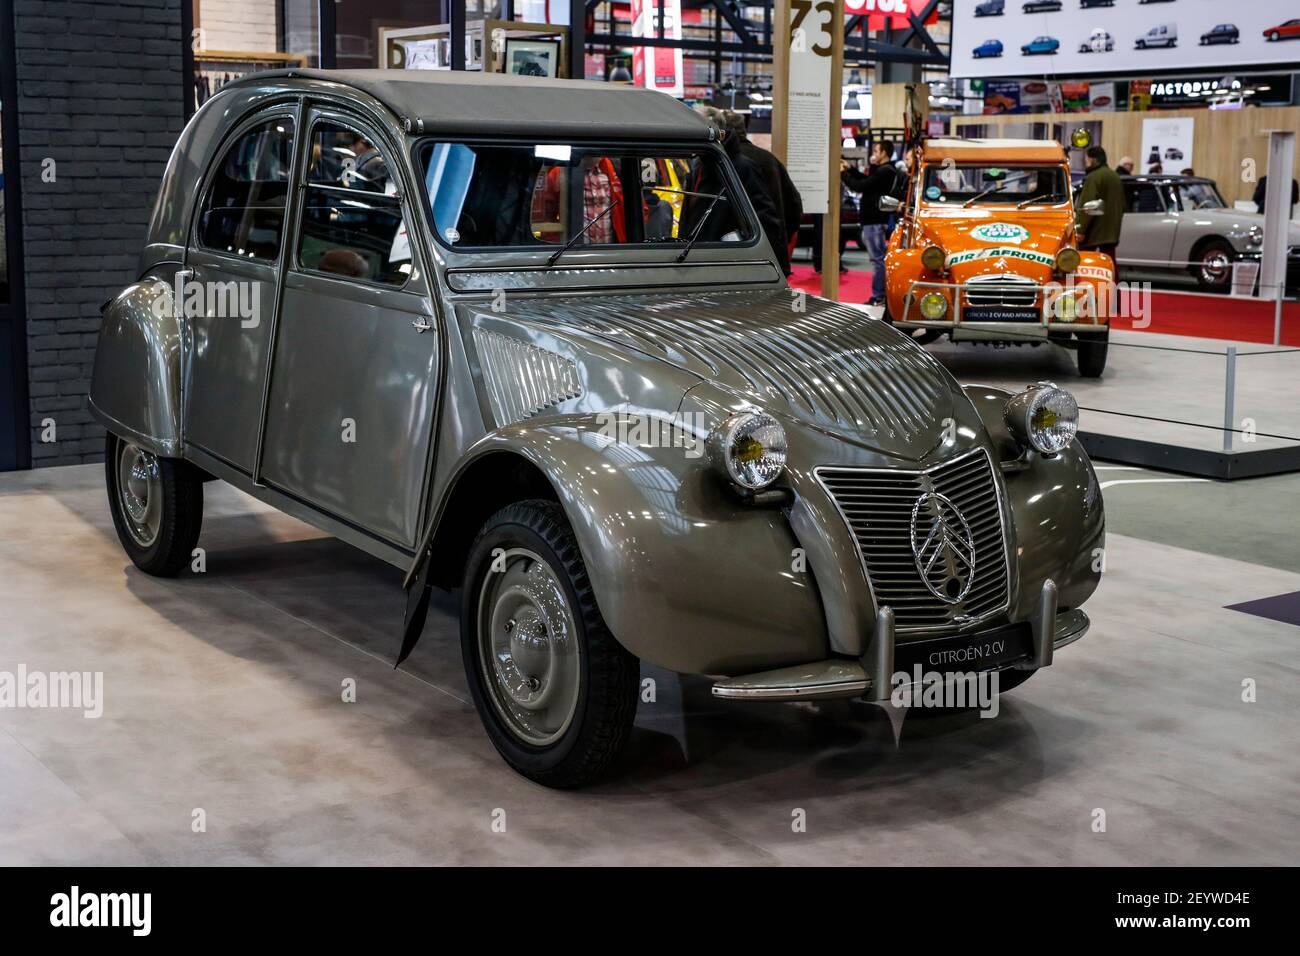 At 75, the Citroën 2CV Is the Little French Car That Could